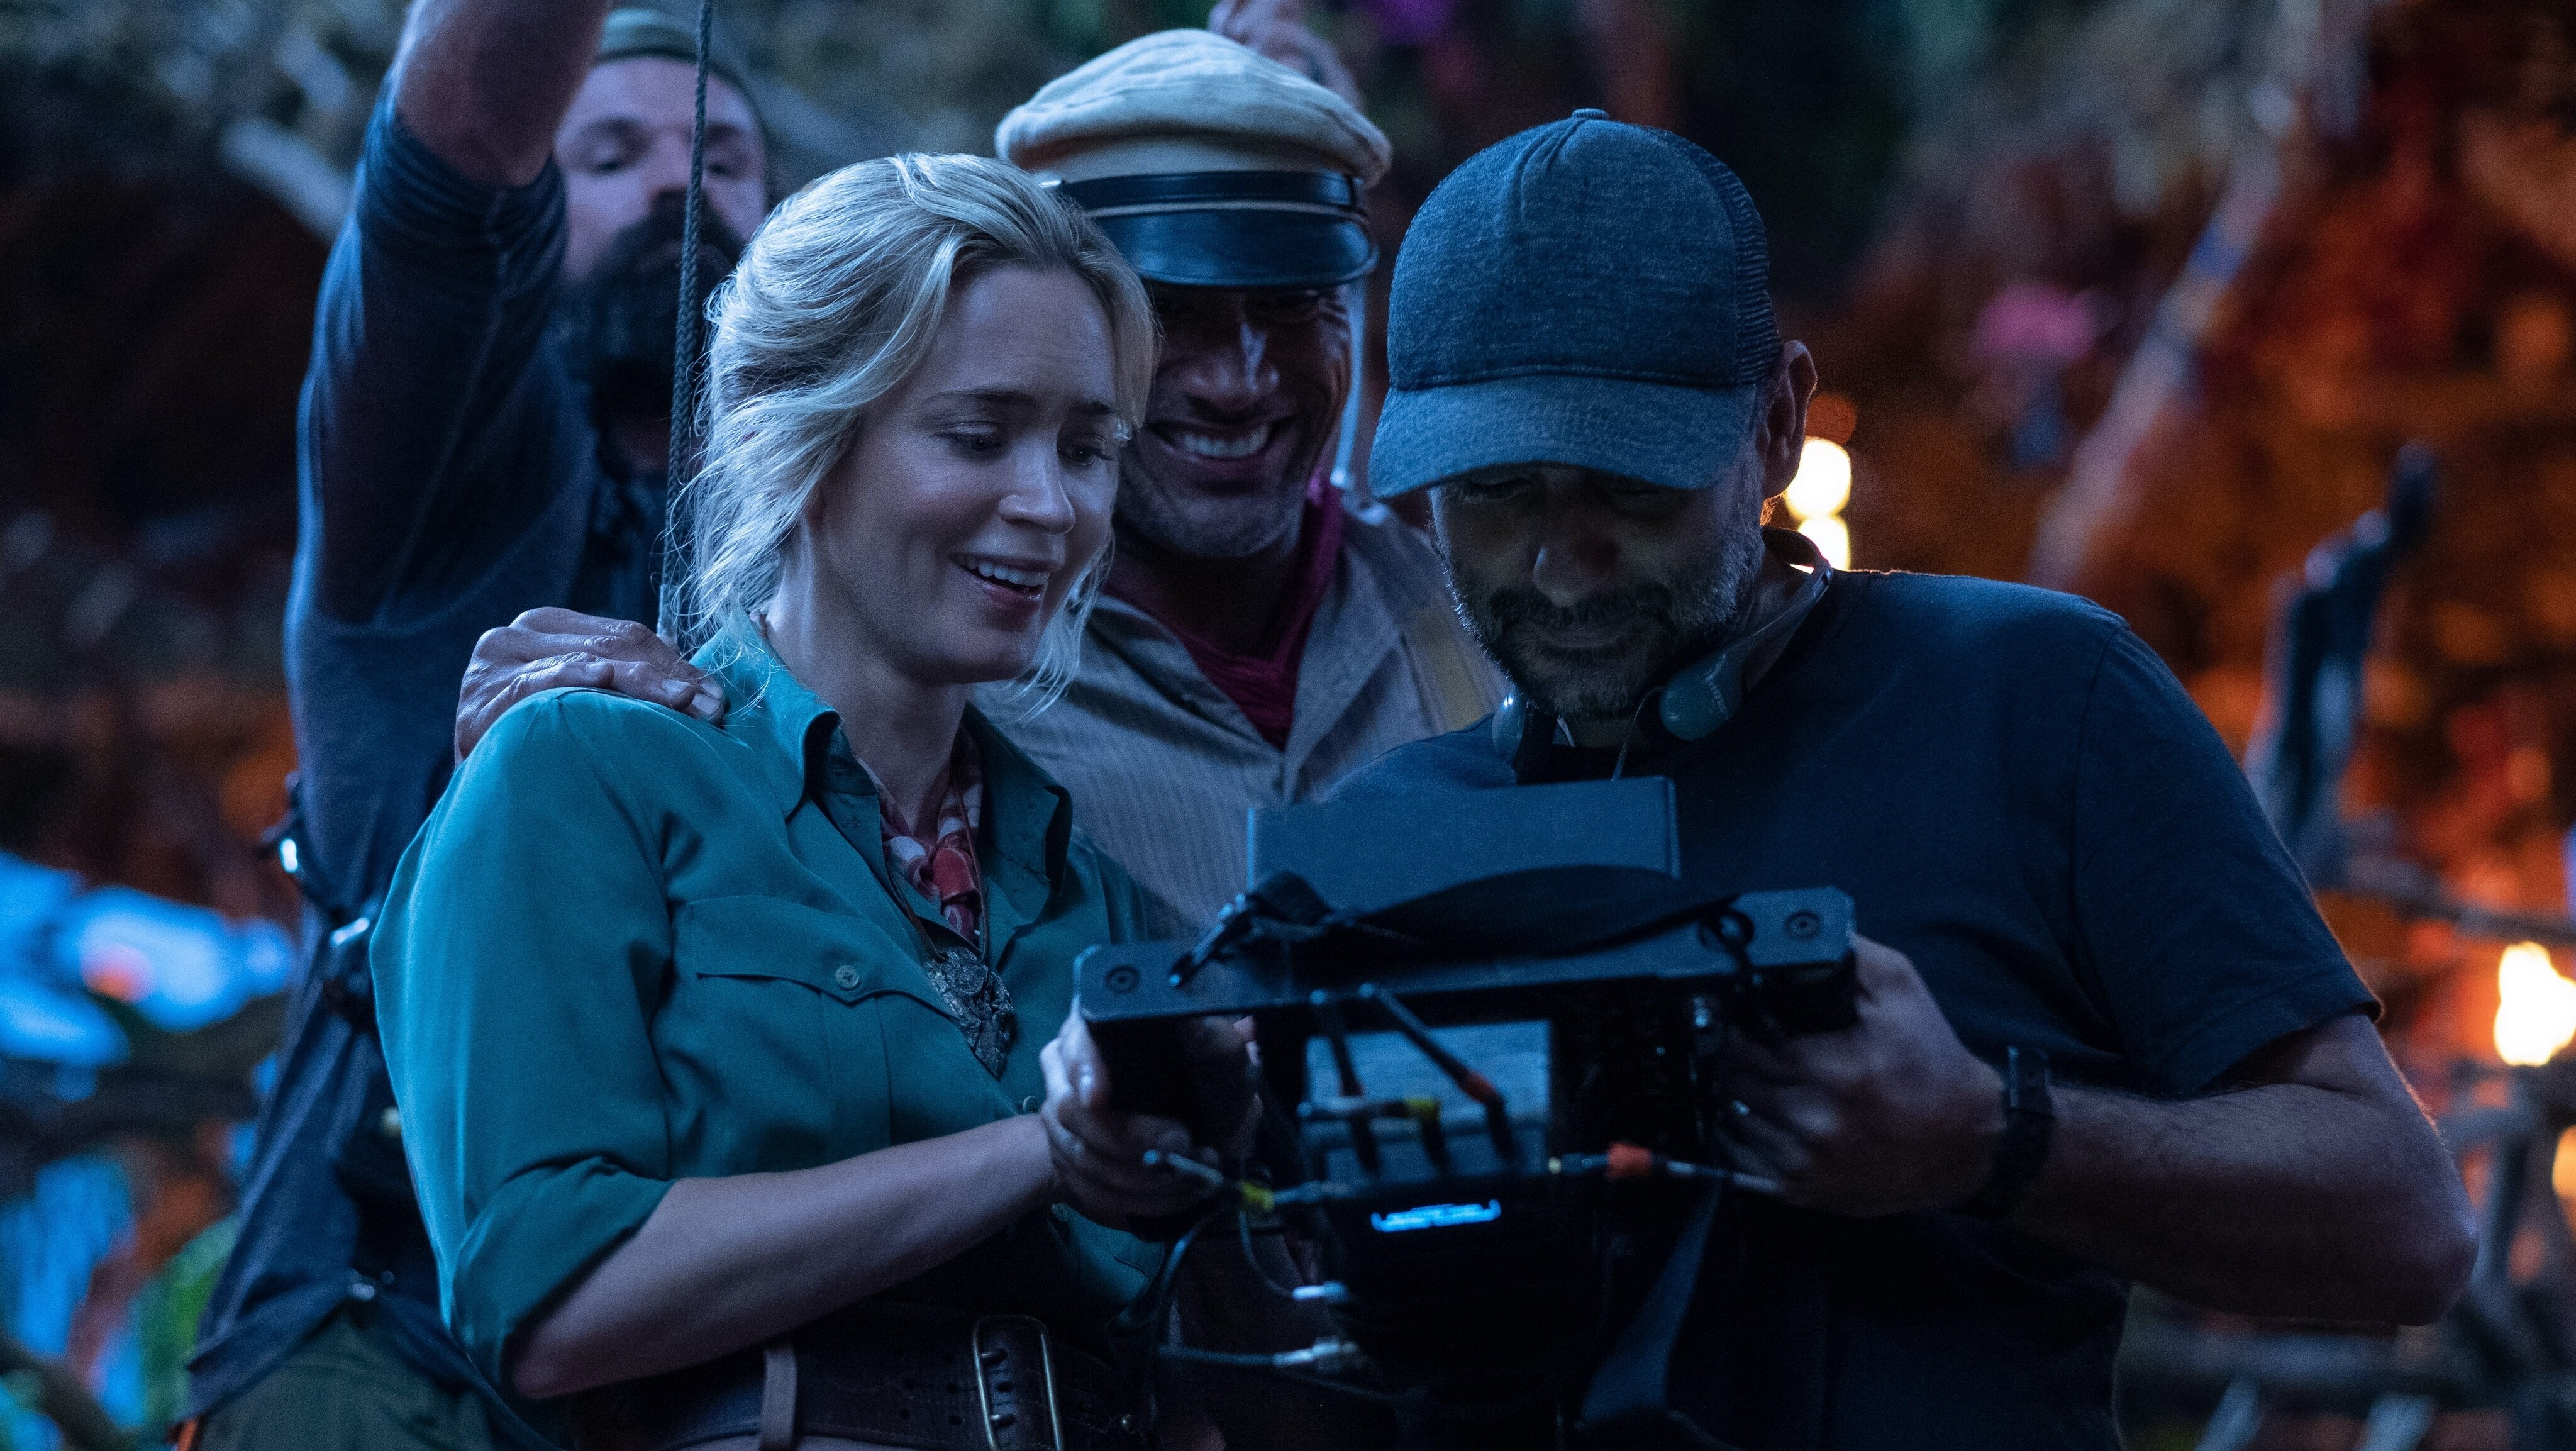 (L-R): Emily Blunt, Dwayne Johnson and director Jaume Collet-Serra on the set of Disney’s JUNGLE CRUISE. Photo by Frank Masi. © 2021 Disney Enterprises, Inc. All Rights Reserved.